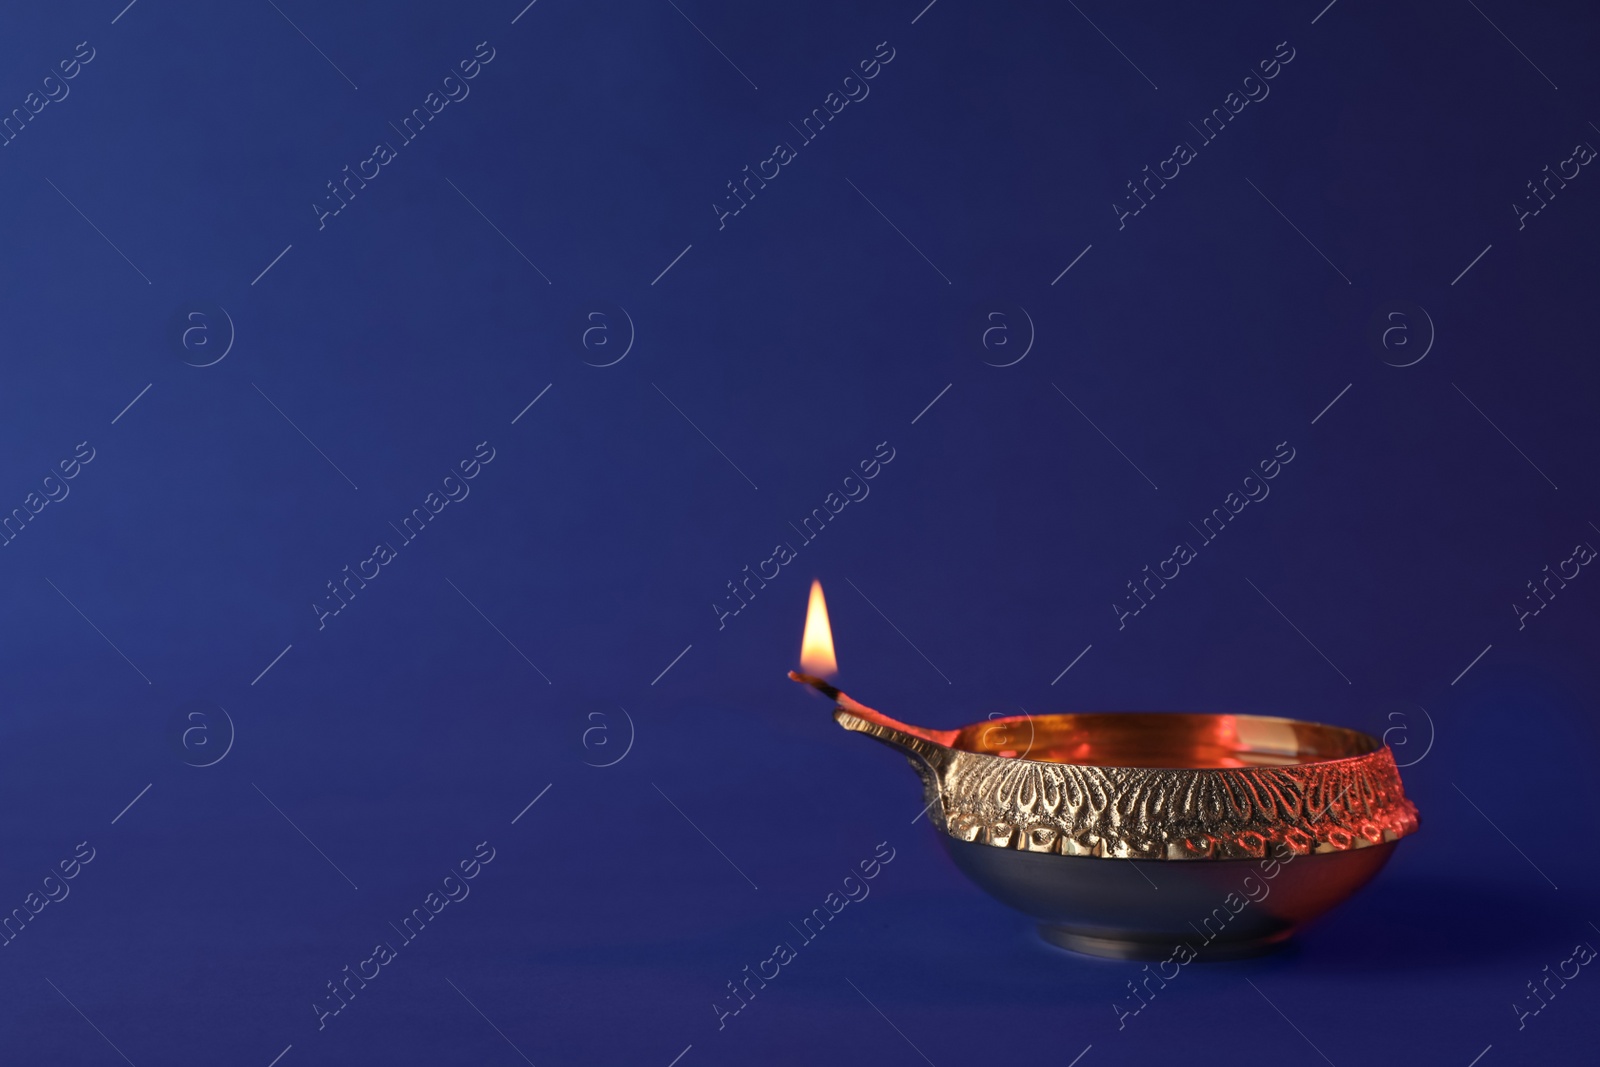 Photo of Diwali diya or clay lamp on color background